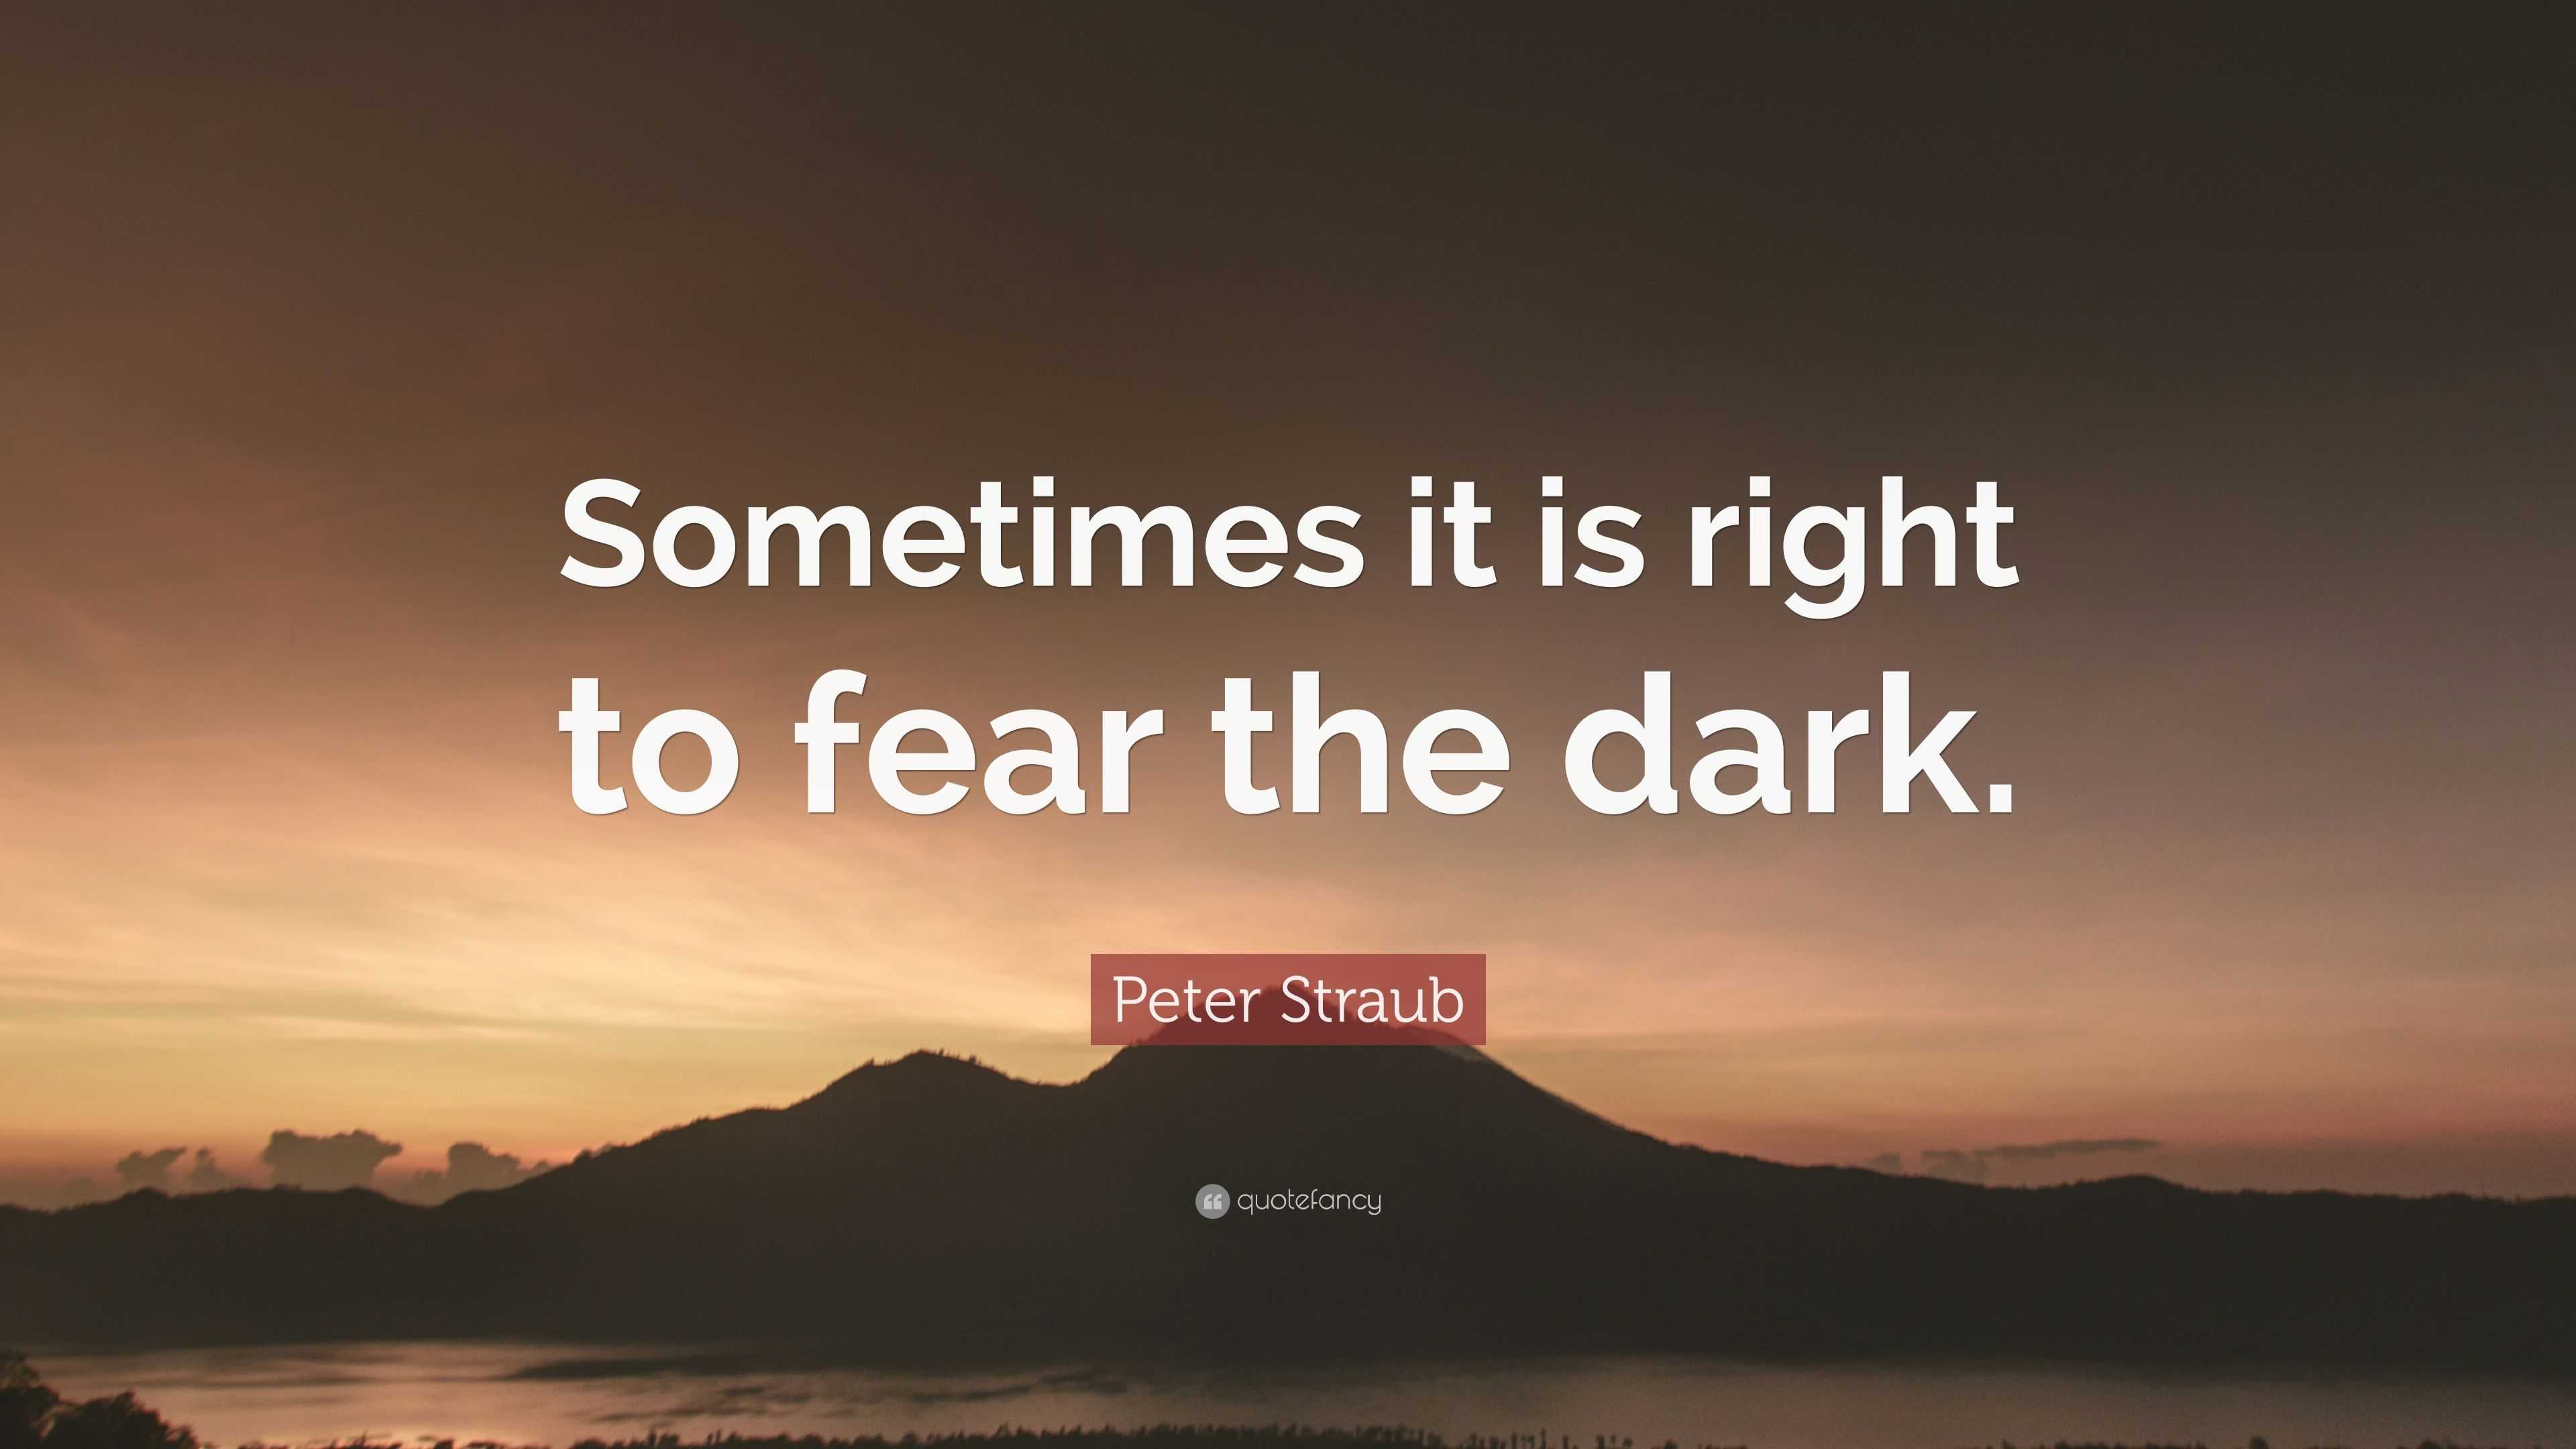 Peter Straub Quote: “Sometimes it is right to fear the dark.”